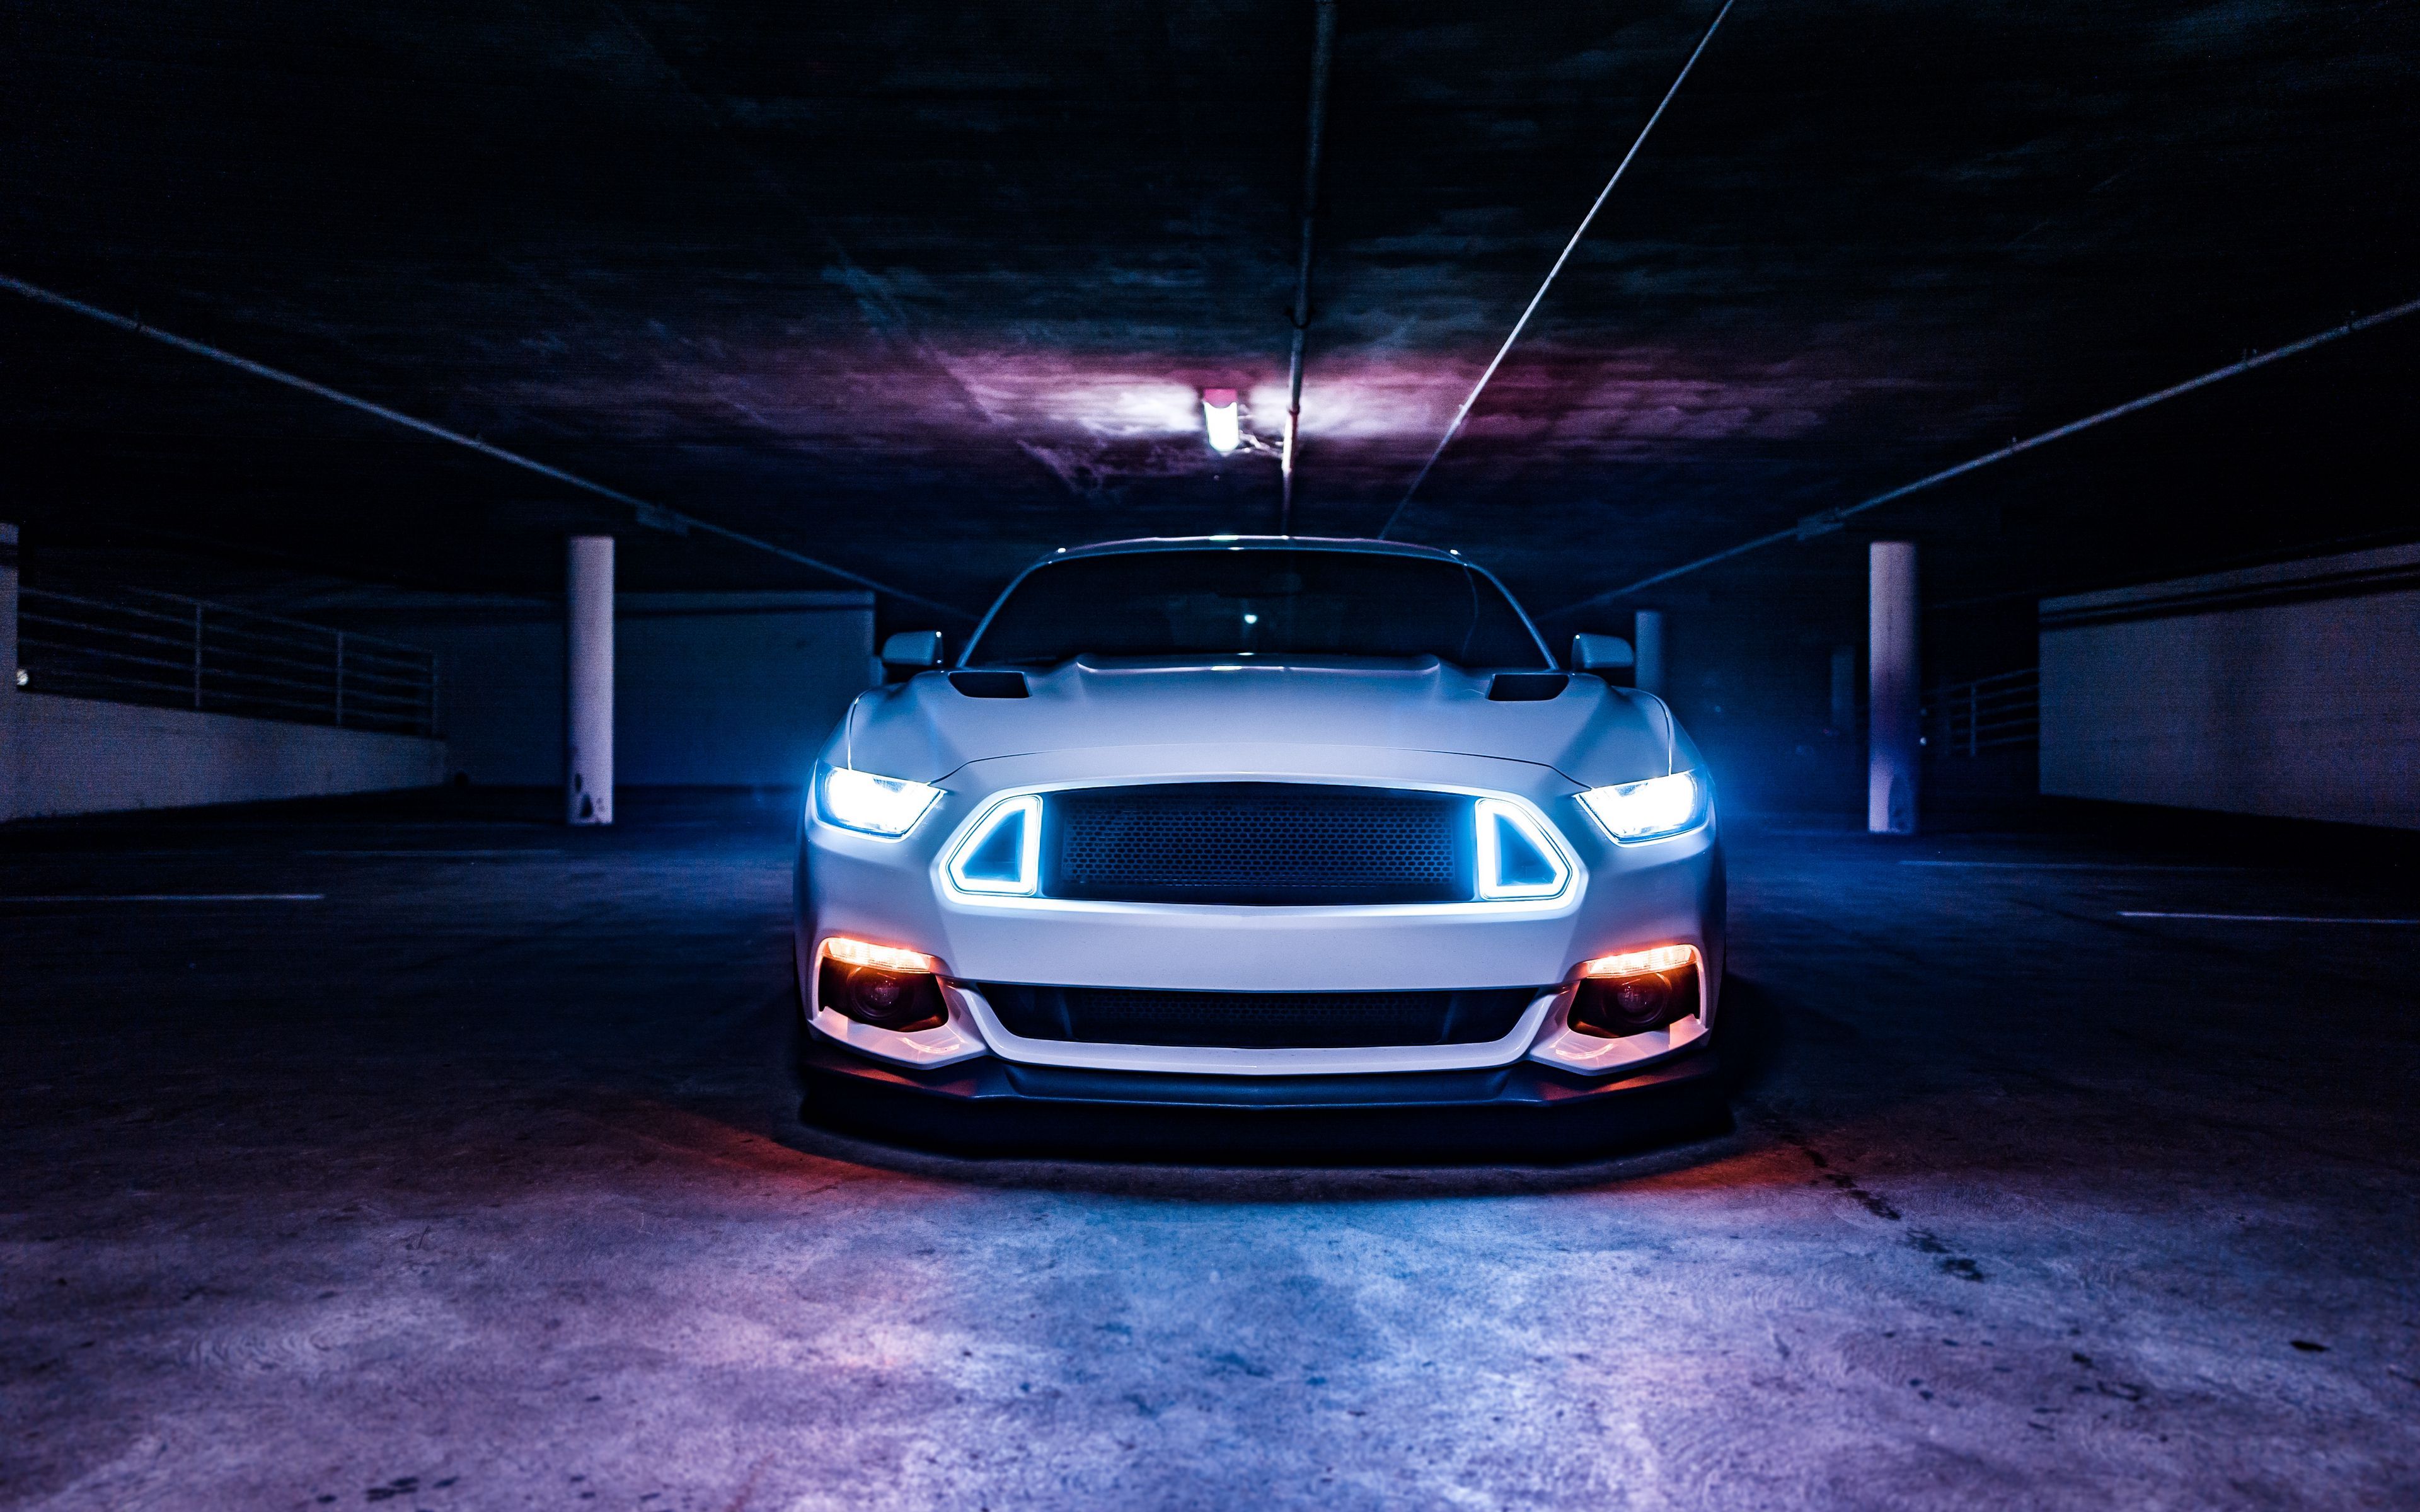 Download wallpaper 3840x2400 shelby mustang, ford mustang, ford